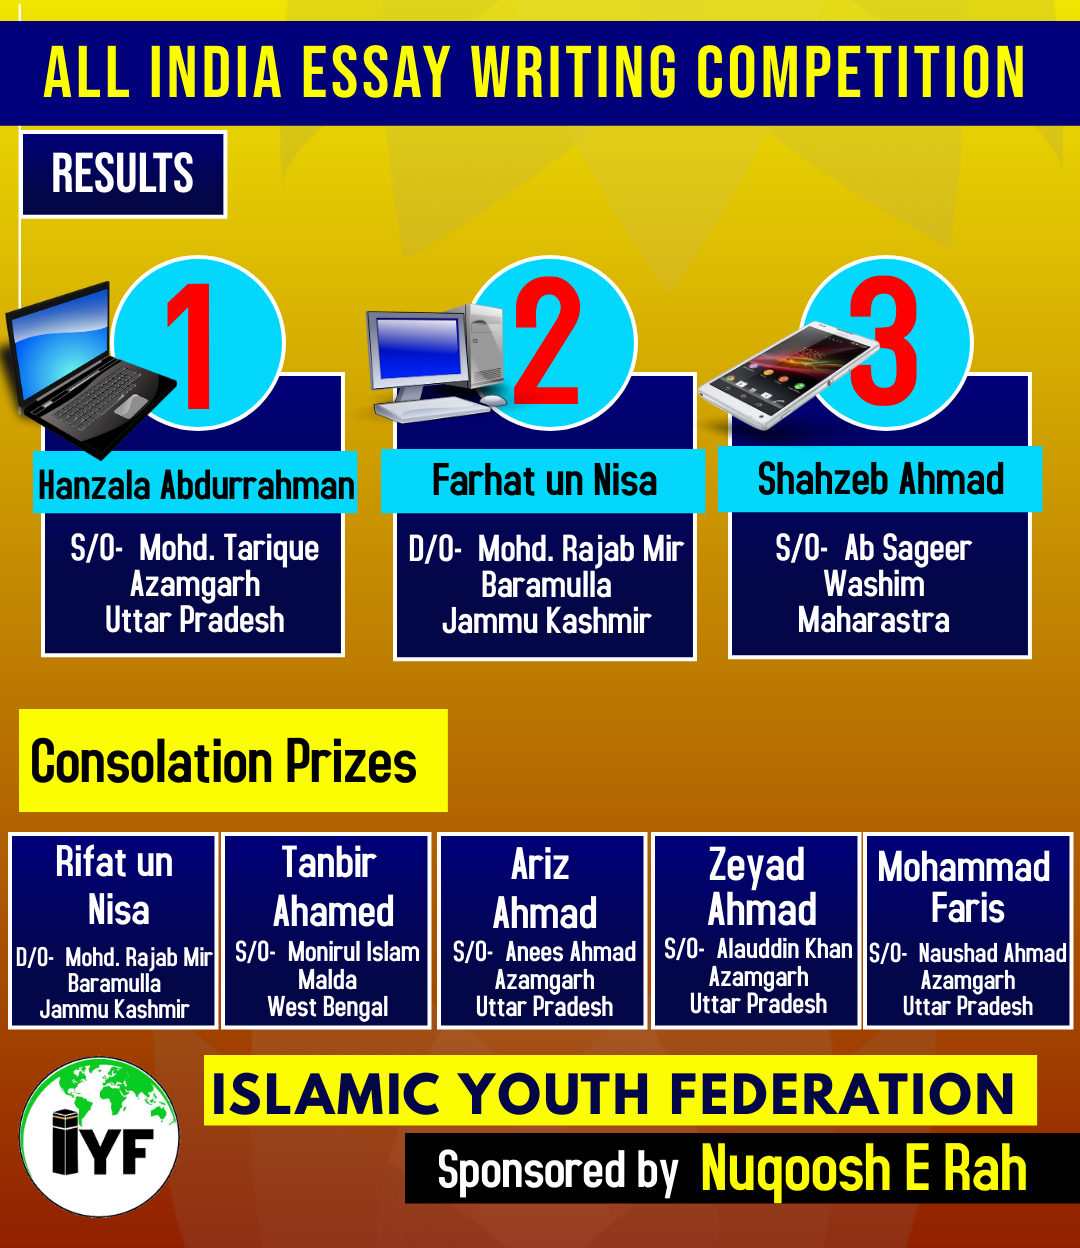 Results of All India Essay Writing Competition